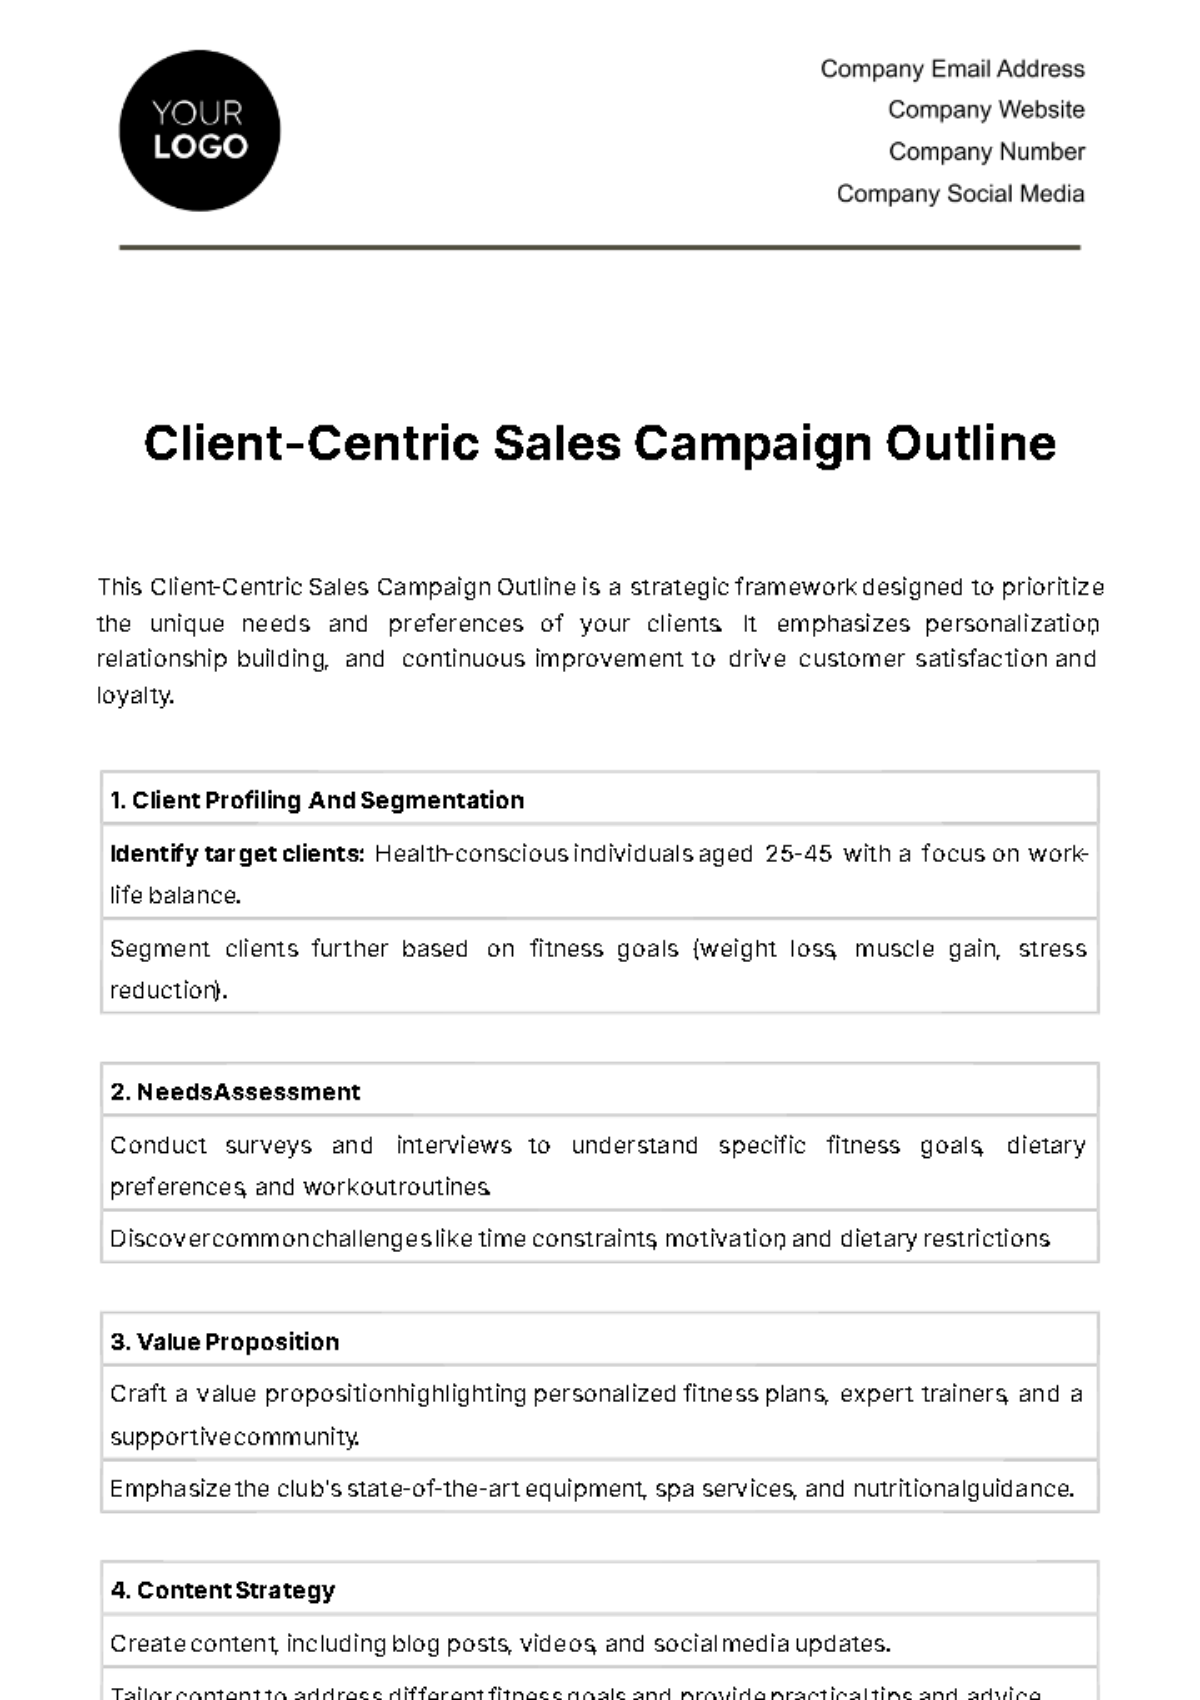 Free Client-centric Sales Campaign Outline Template